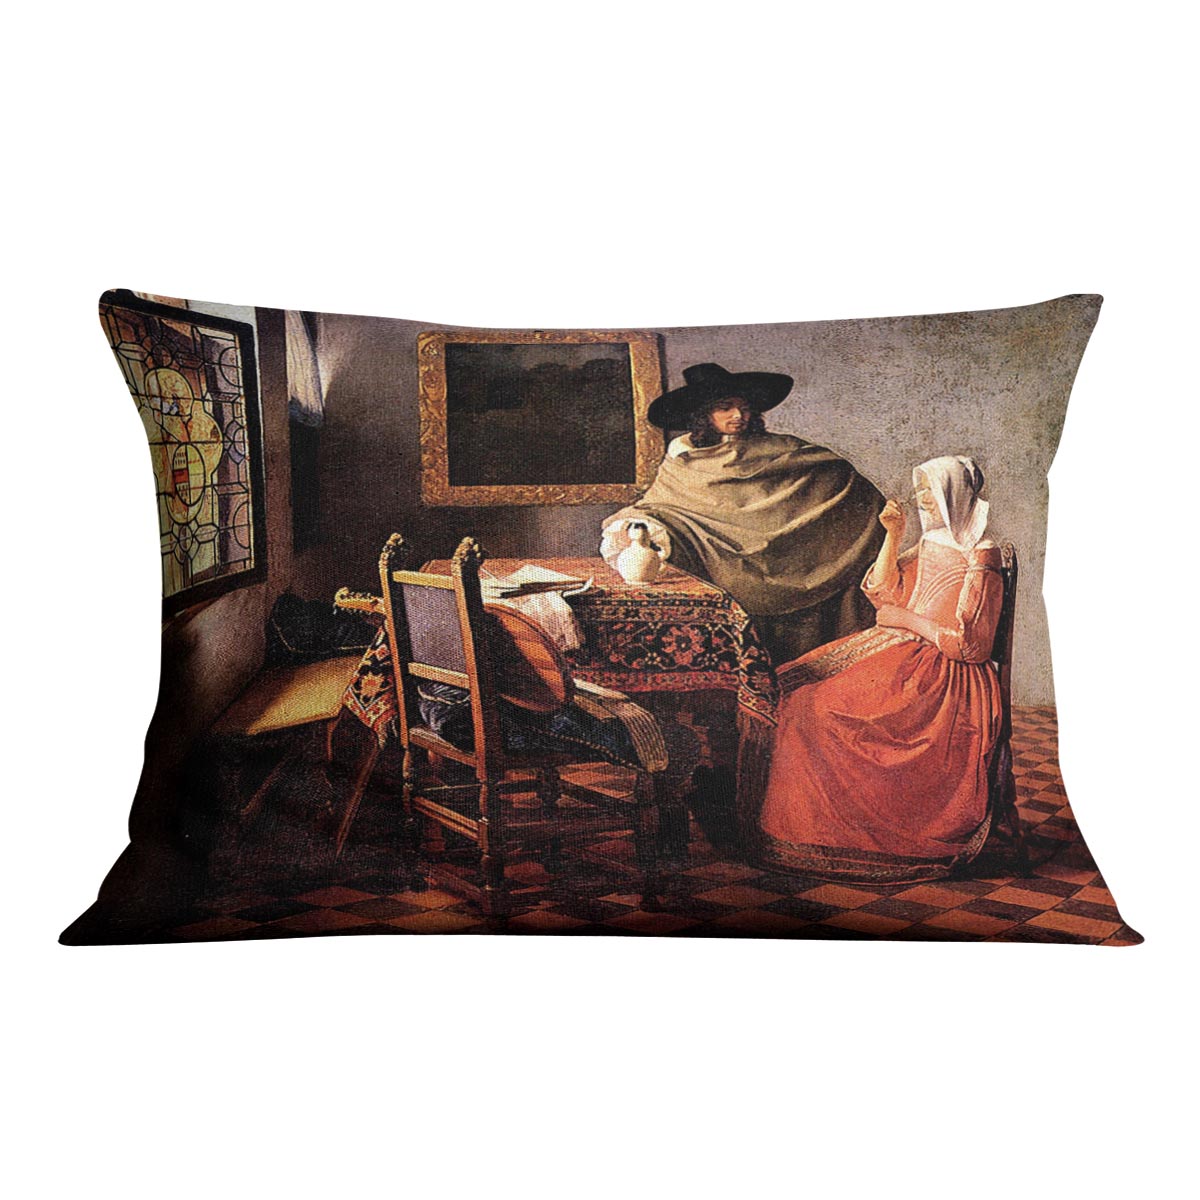 Glass of wine by Vermeer Cushion